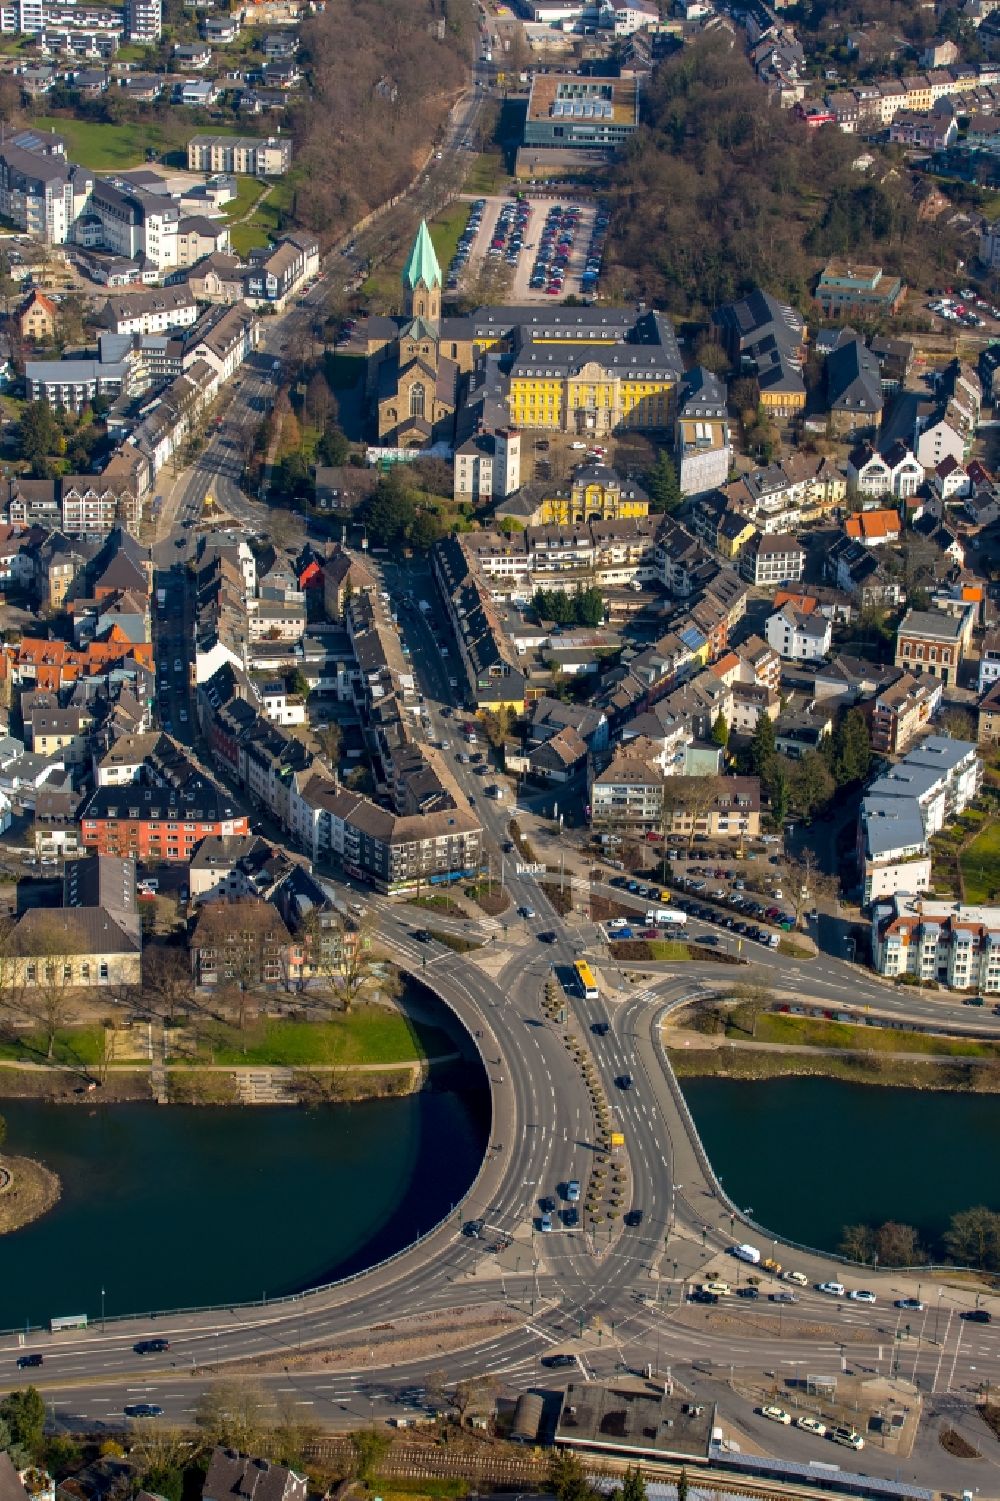 Werden from above - View of Werden on the river Ruhr and the Gustav-Heinemann- Bridge, Folkwang University and Basilika St.Ludgerus in the state of North Rhine-Westphalia